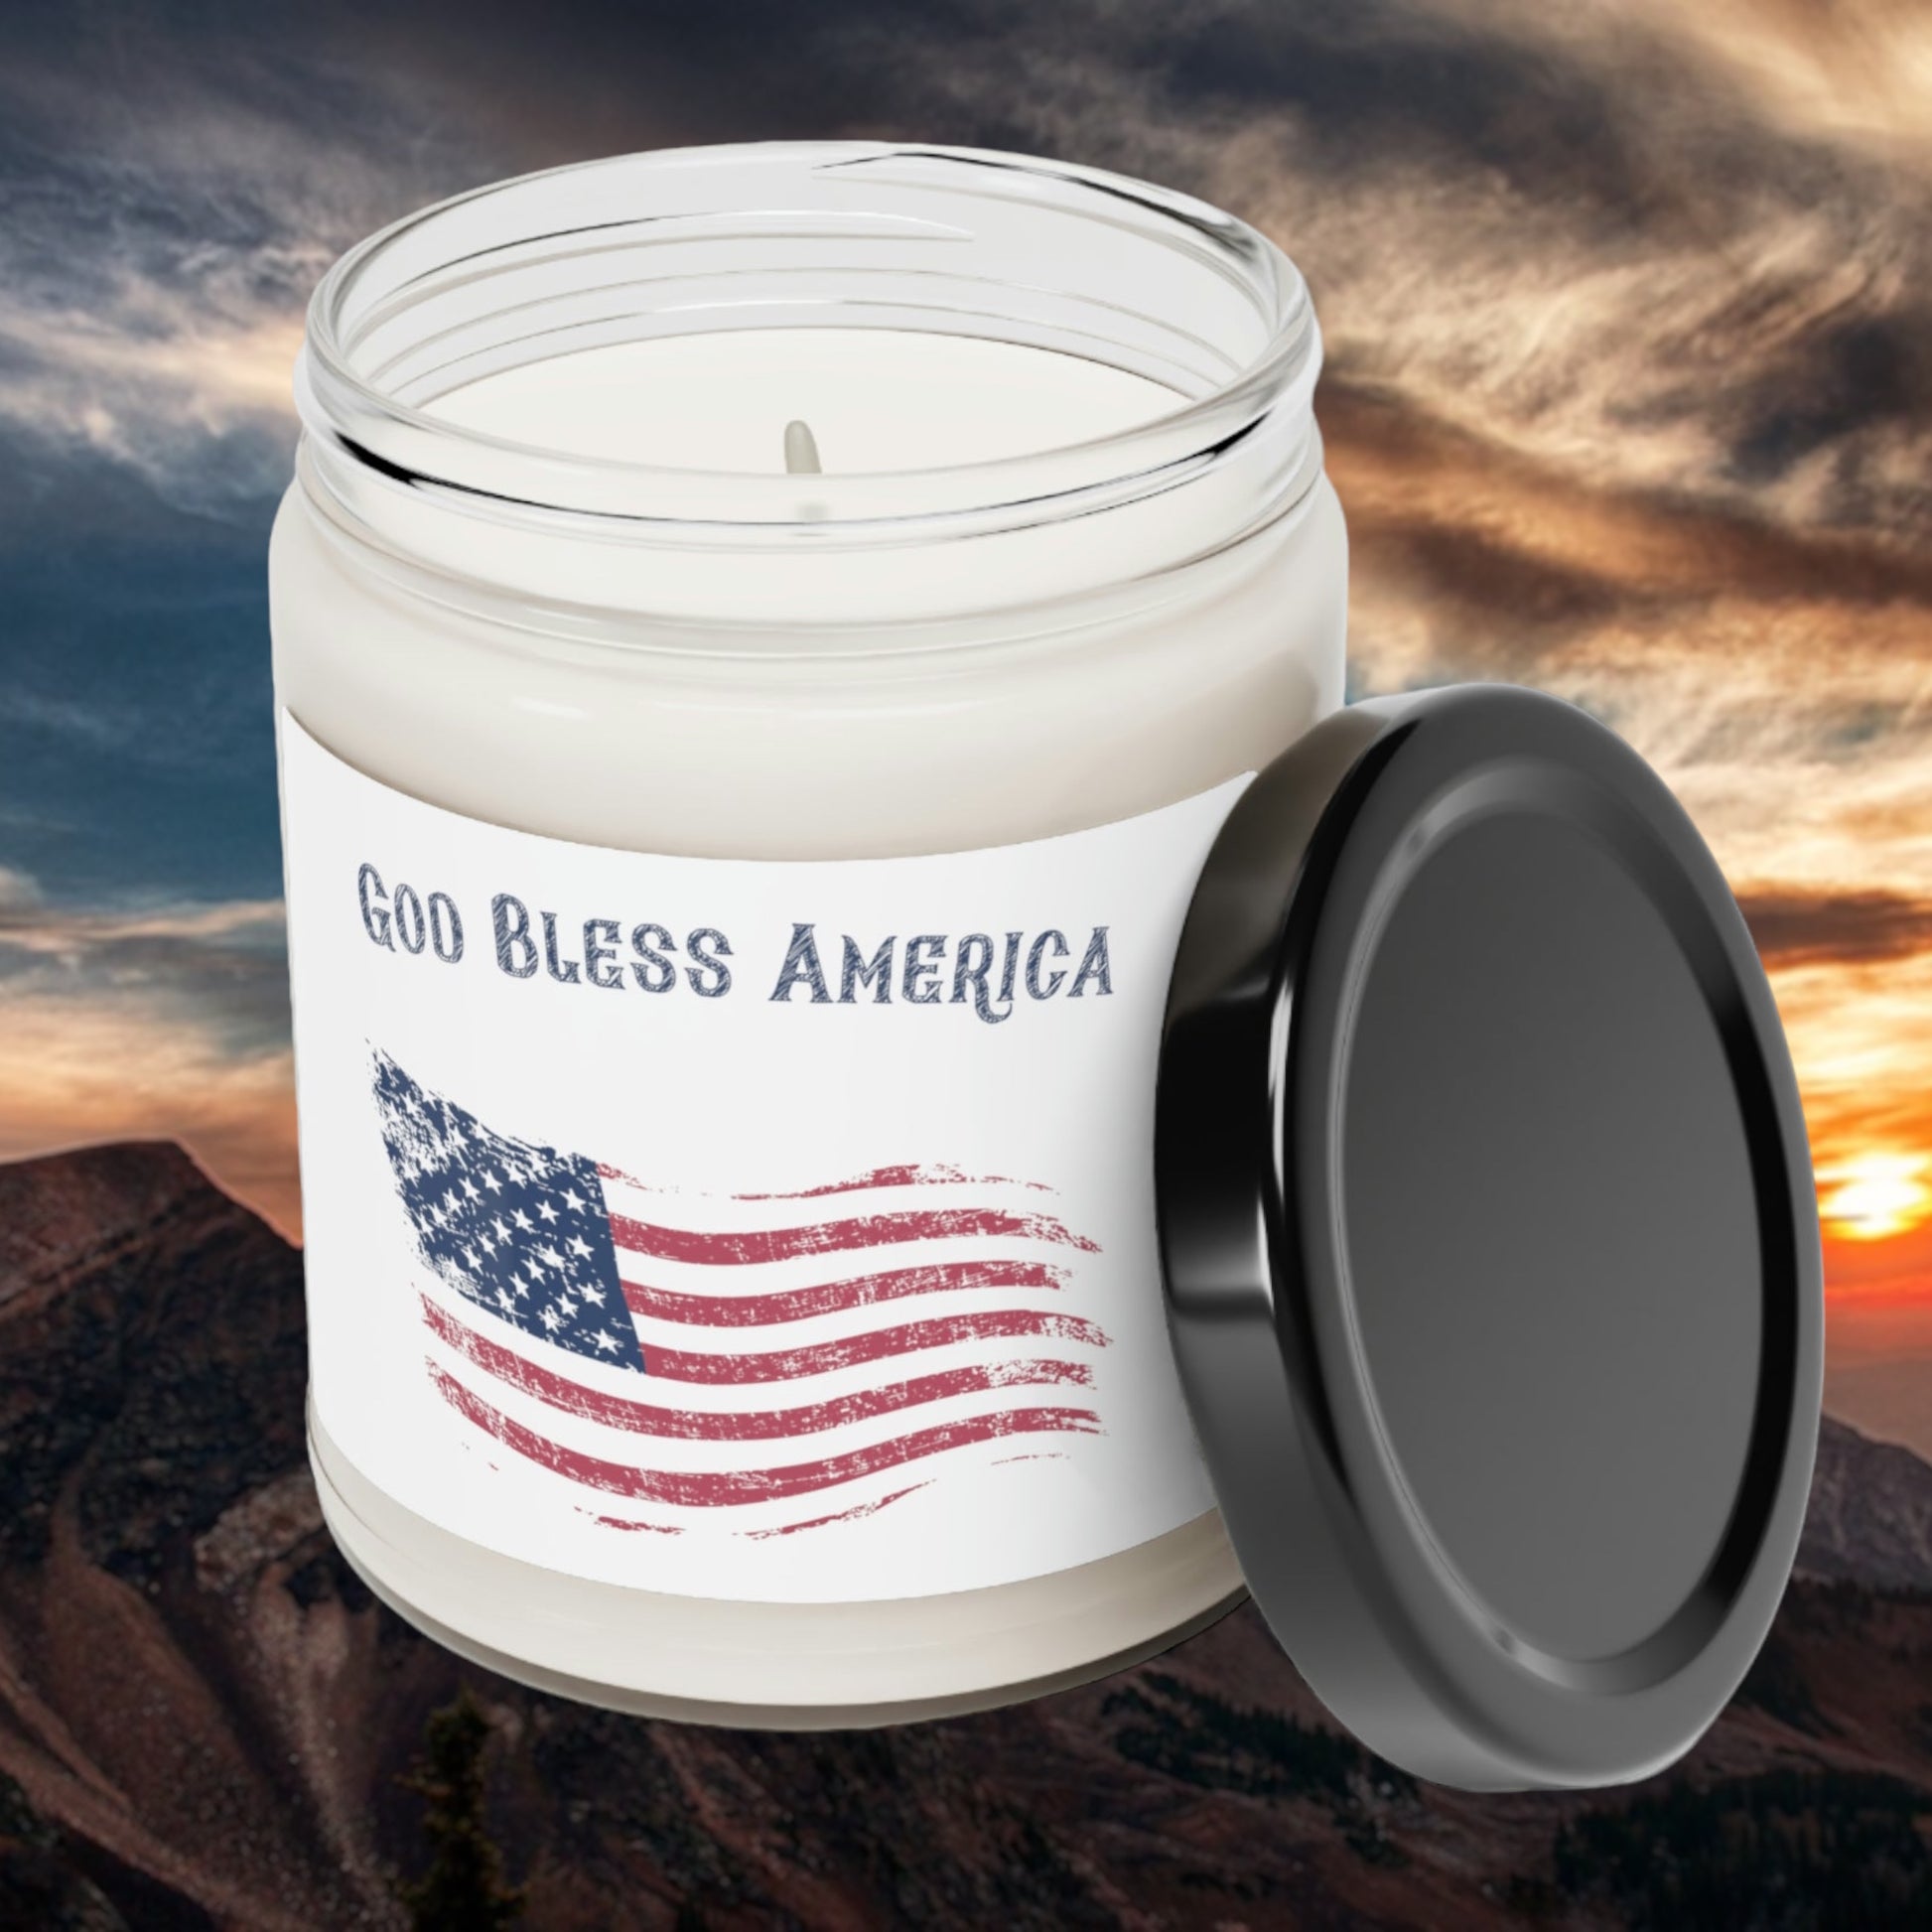 God Bless America candle with American flag design